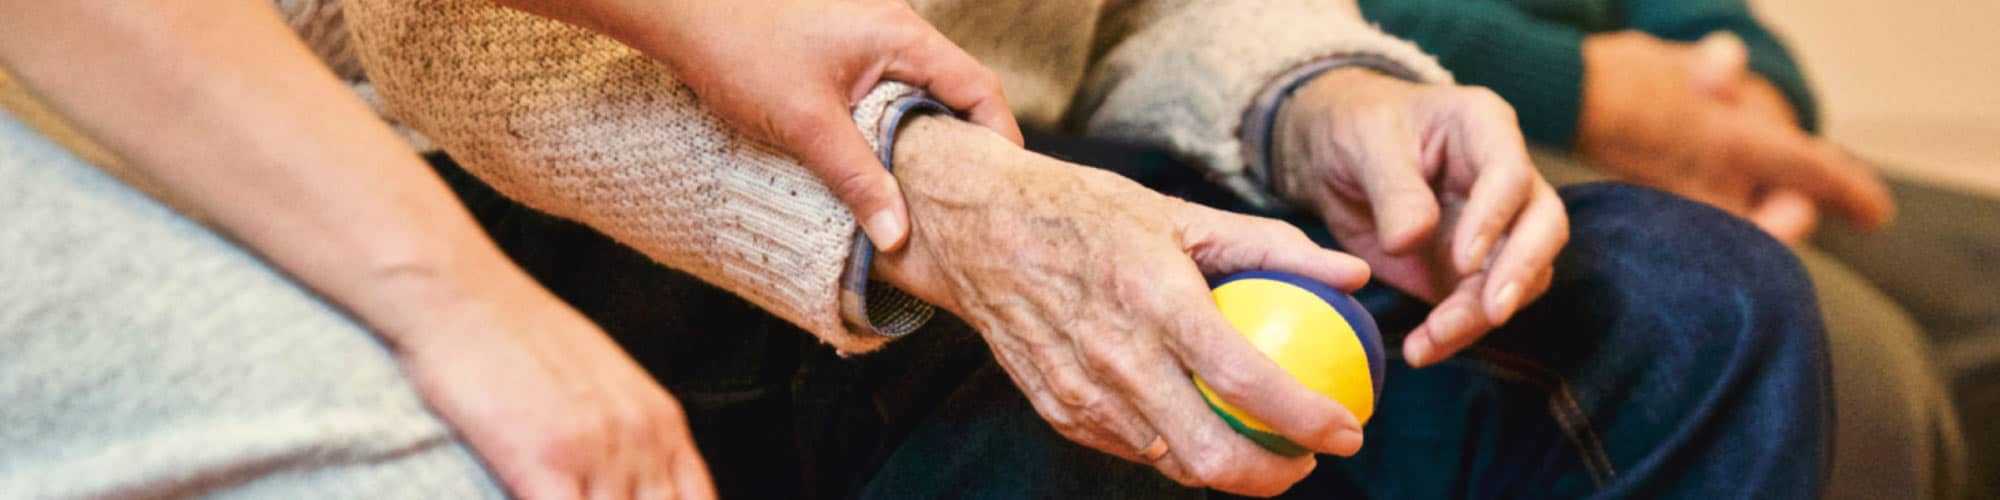 Elderly person holding a ball with caregiver assisting their wrist